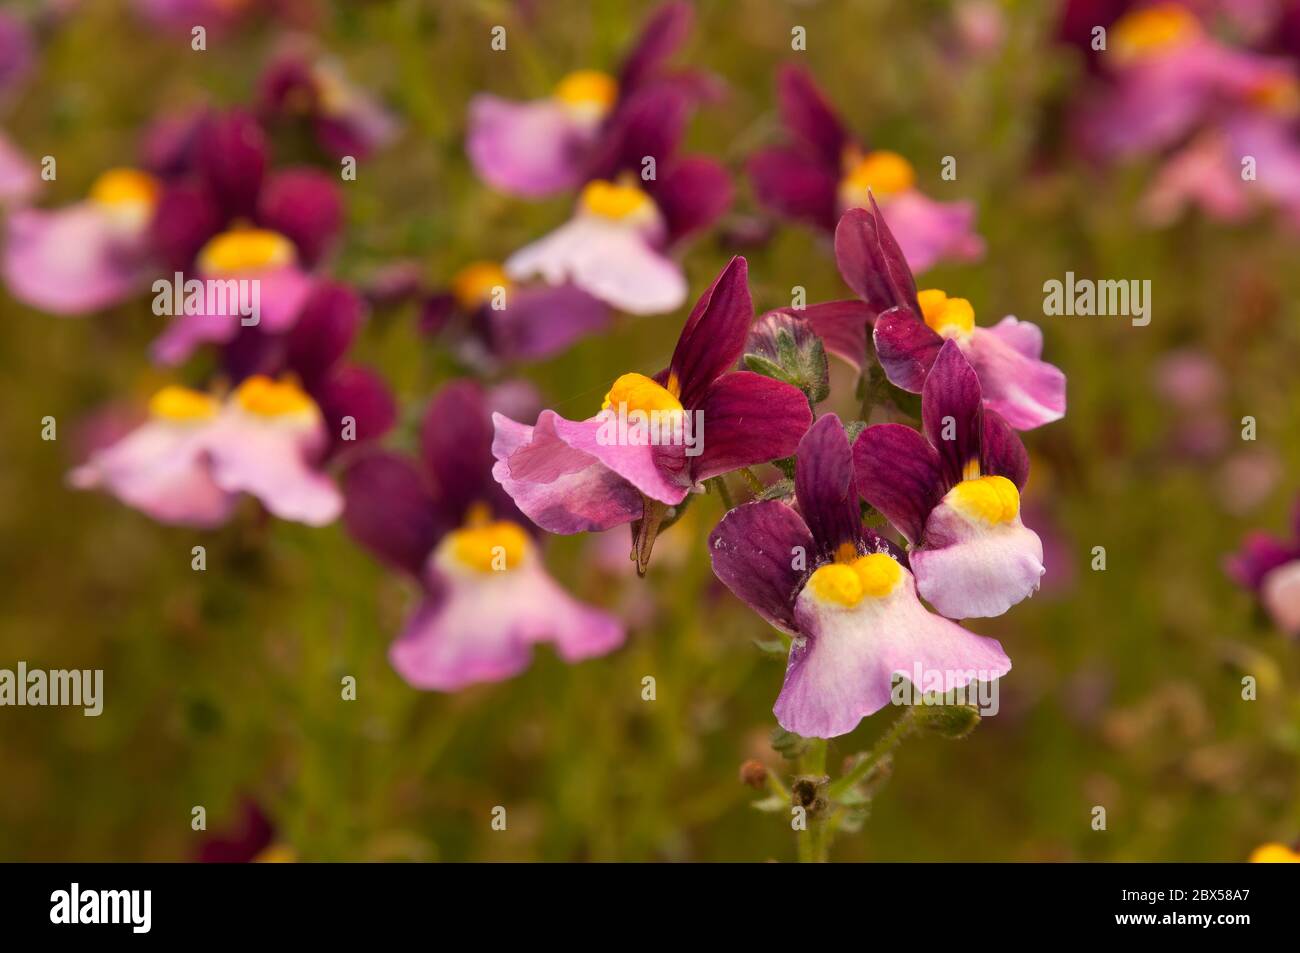 Sydney Australia, purple and yellow linaria flowers which look like mini snapdragon flowers Stock Photo